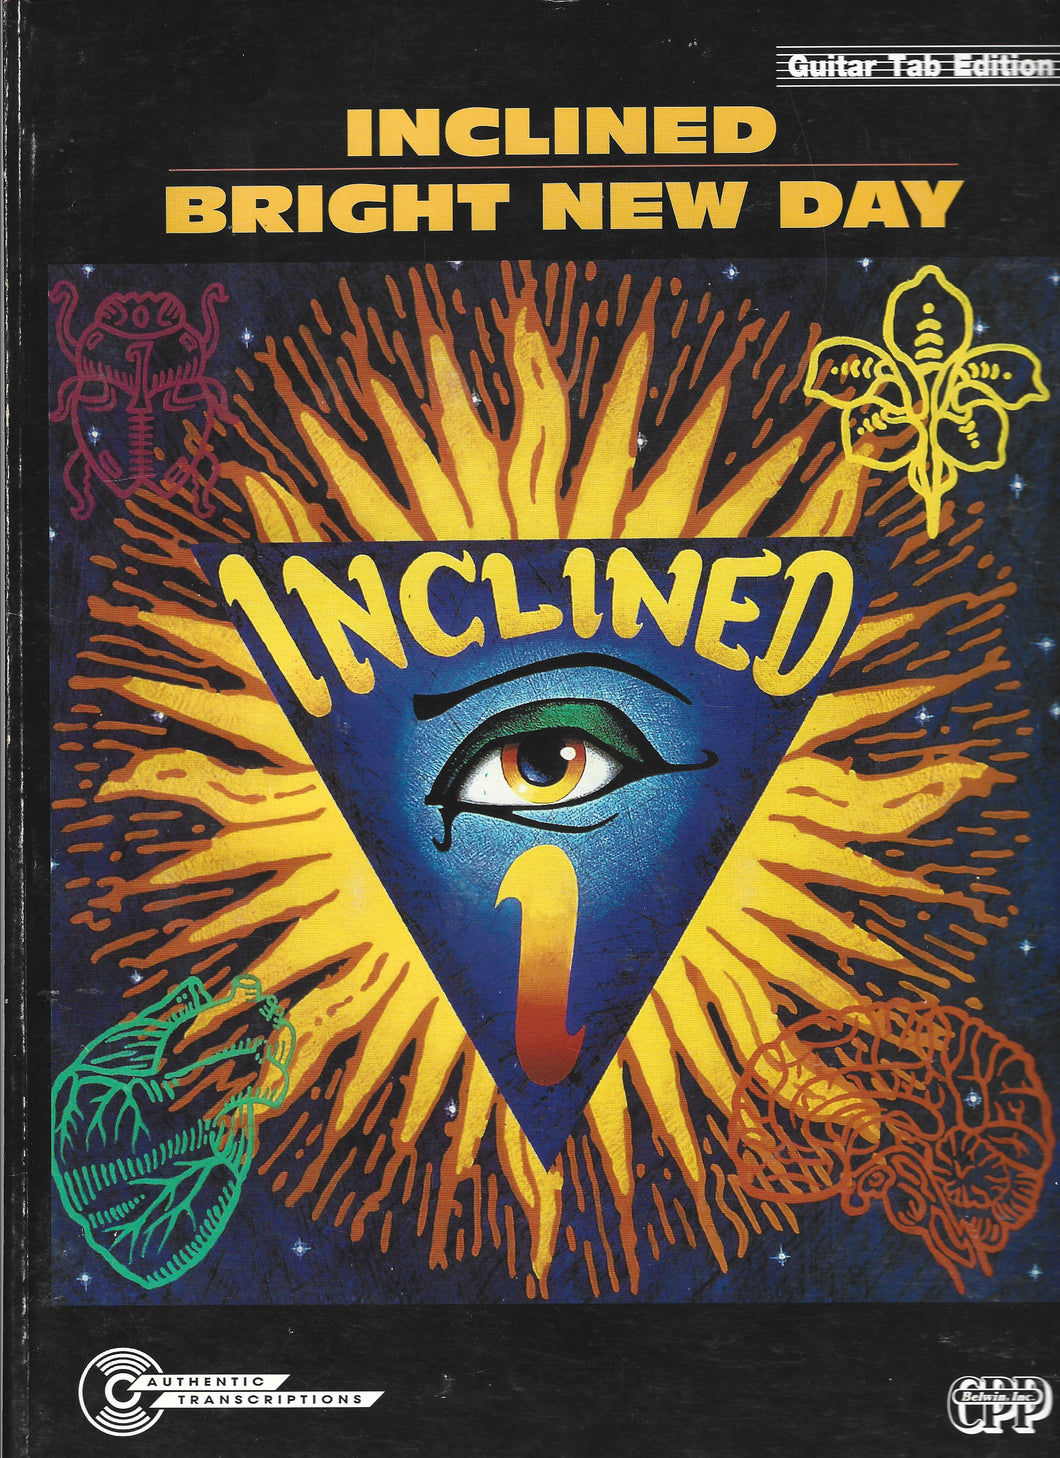 Belwin Inclined Bright New Day Guitar Tab 1993